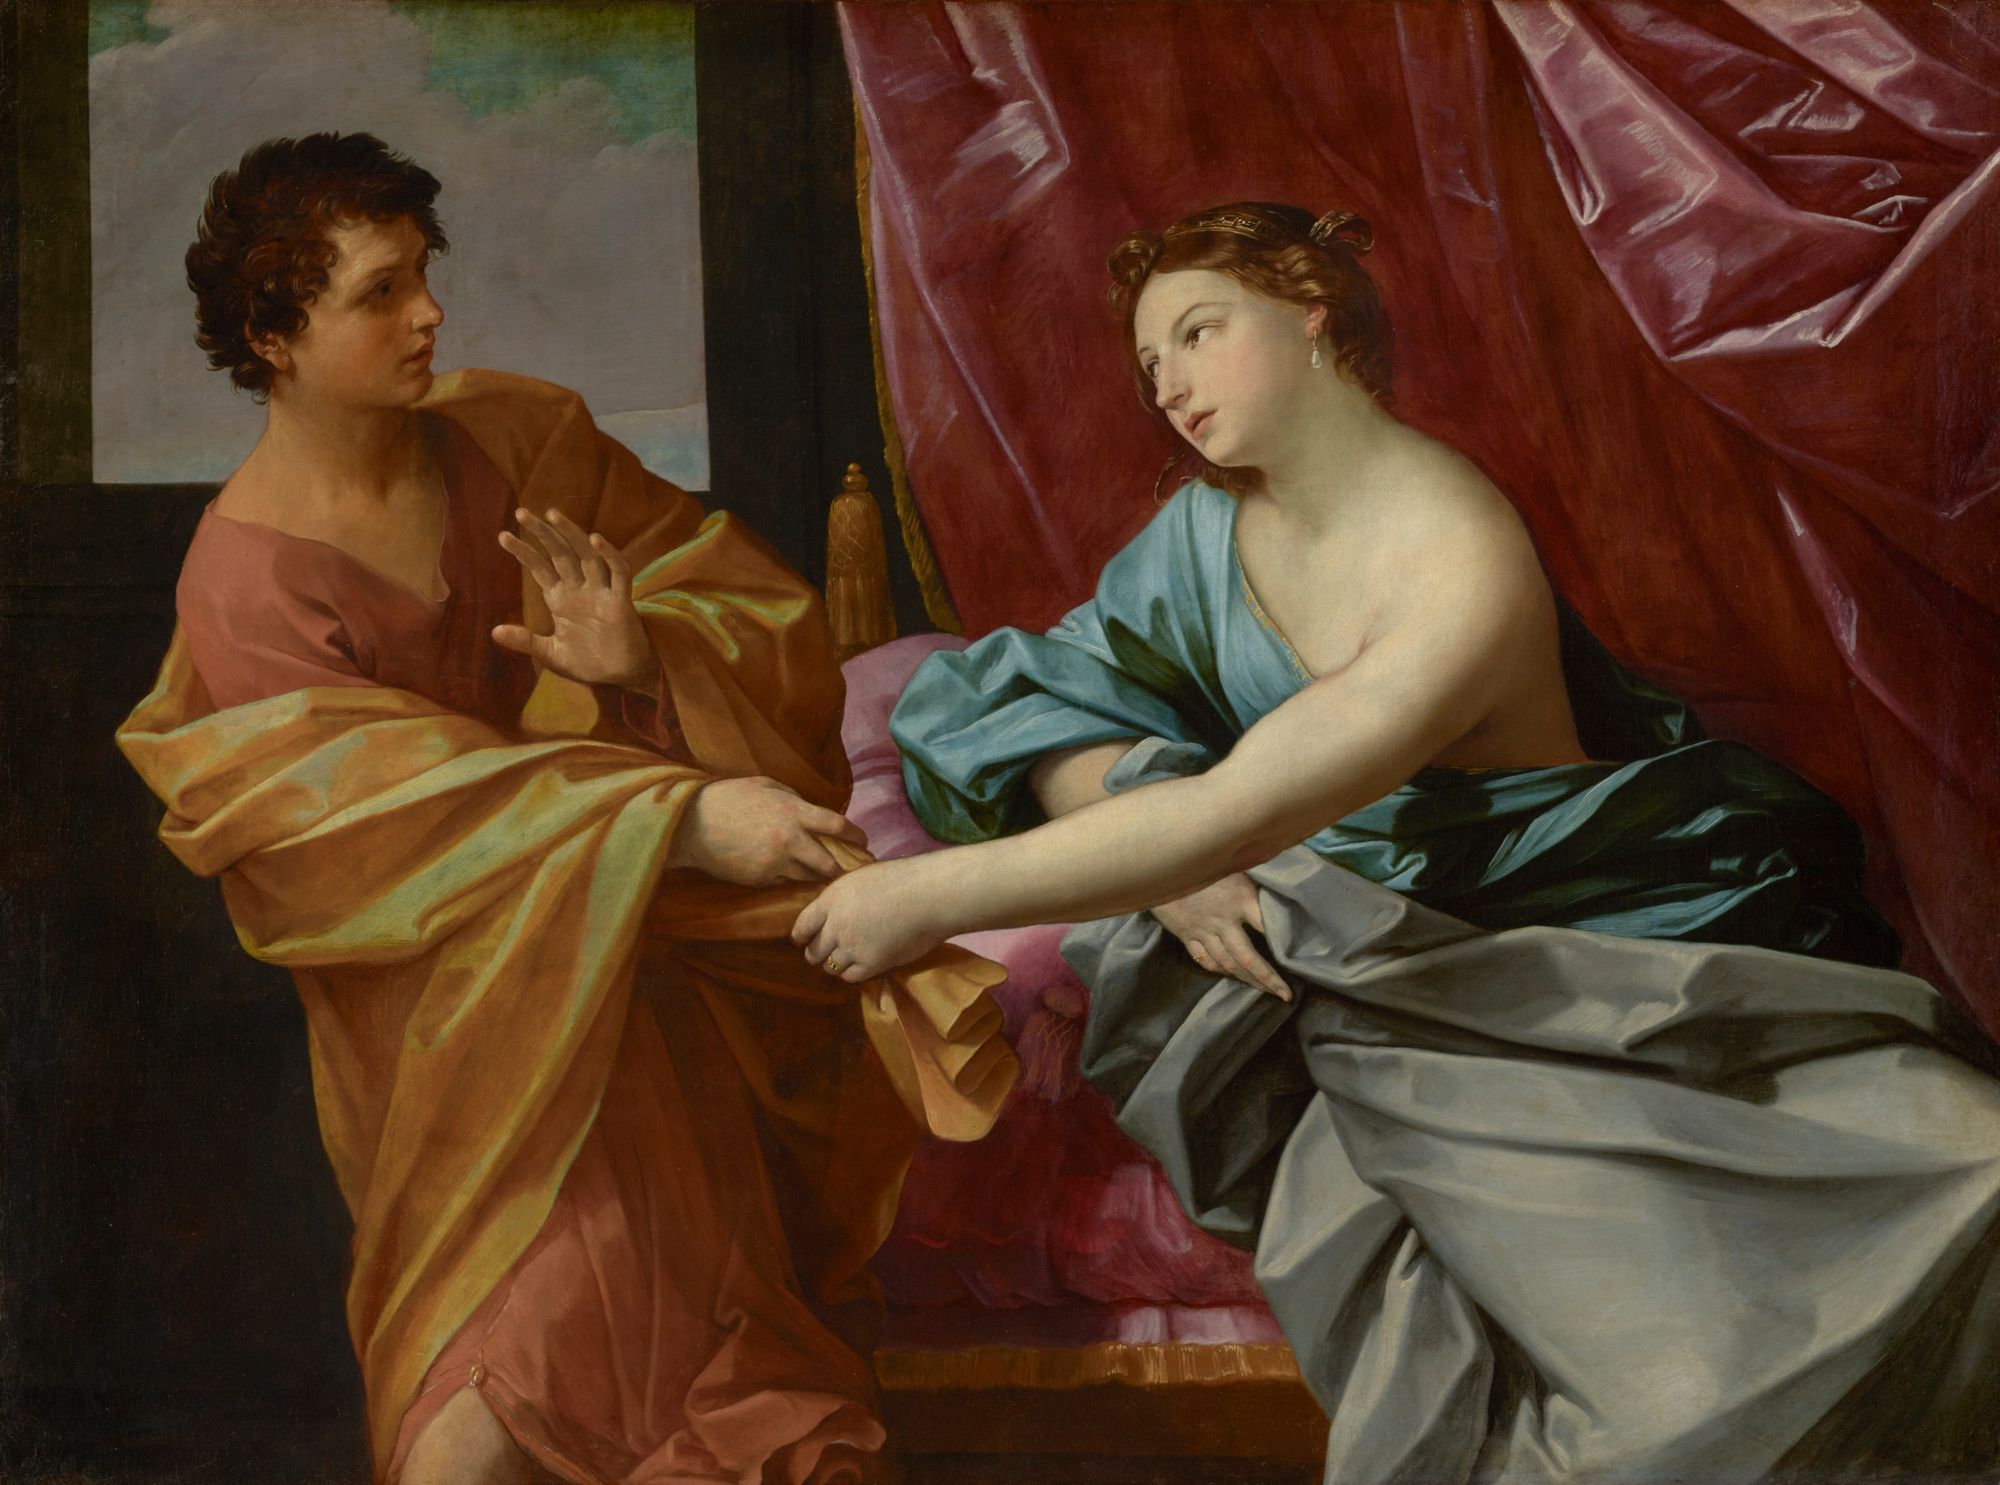 Joseph and Potiphar's Wife (about 1630) by Guido Reni - Public Domain